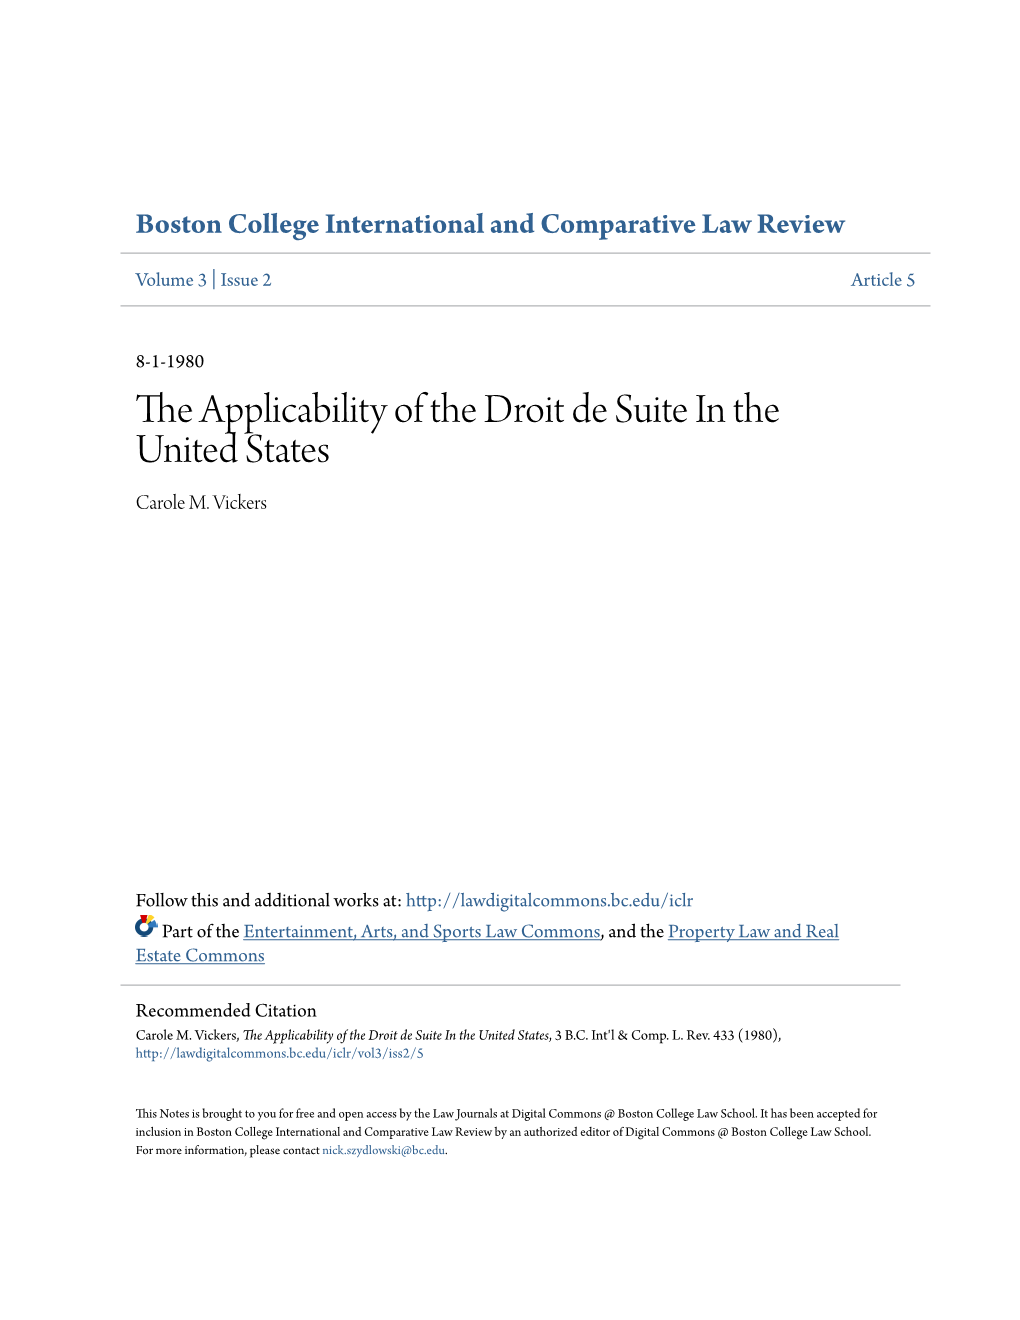 The Applicability of the Droit De Suite in the United States Carole M